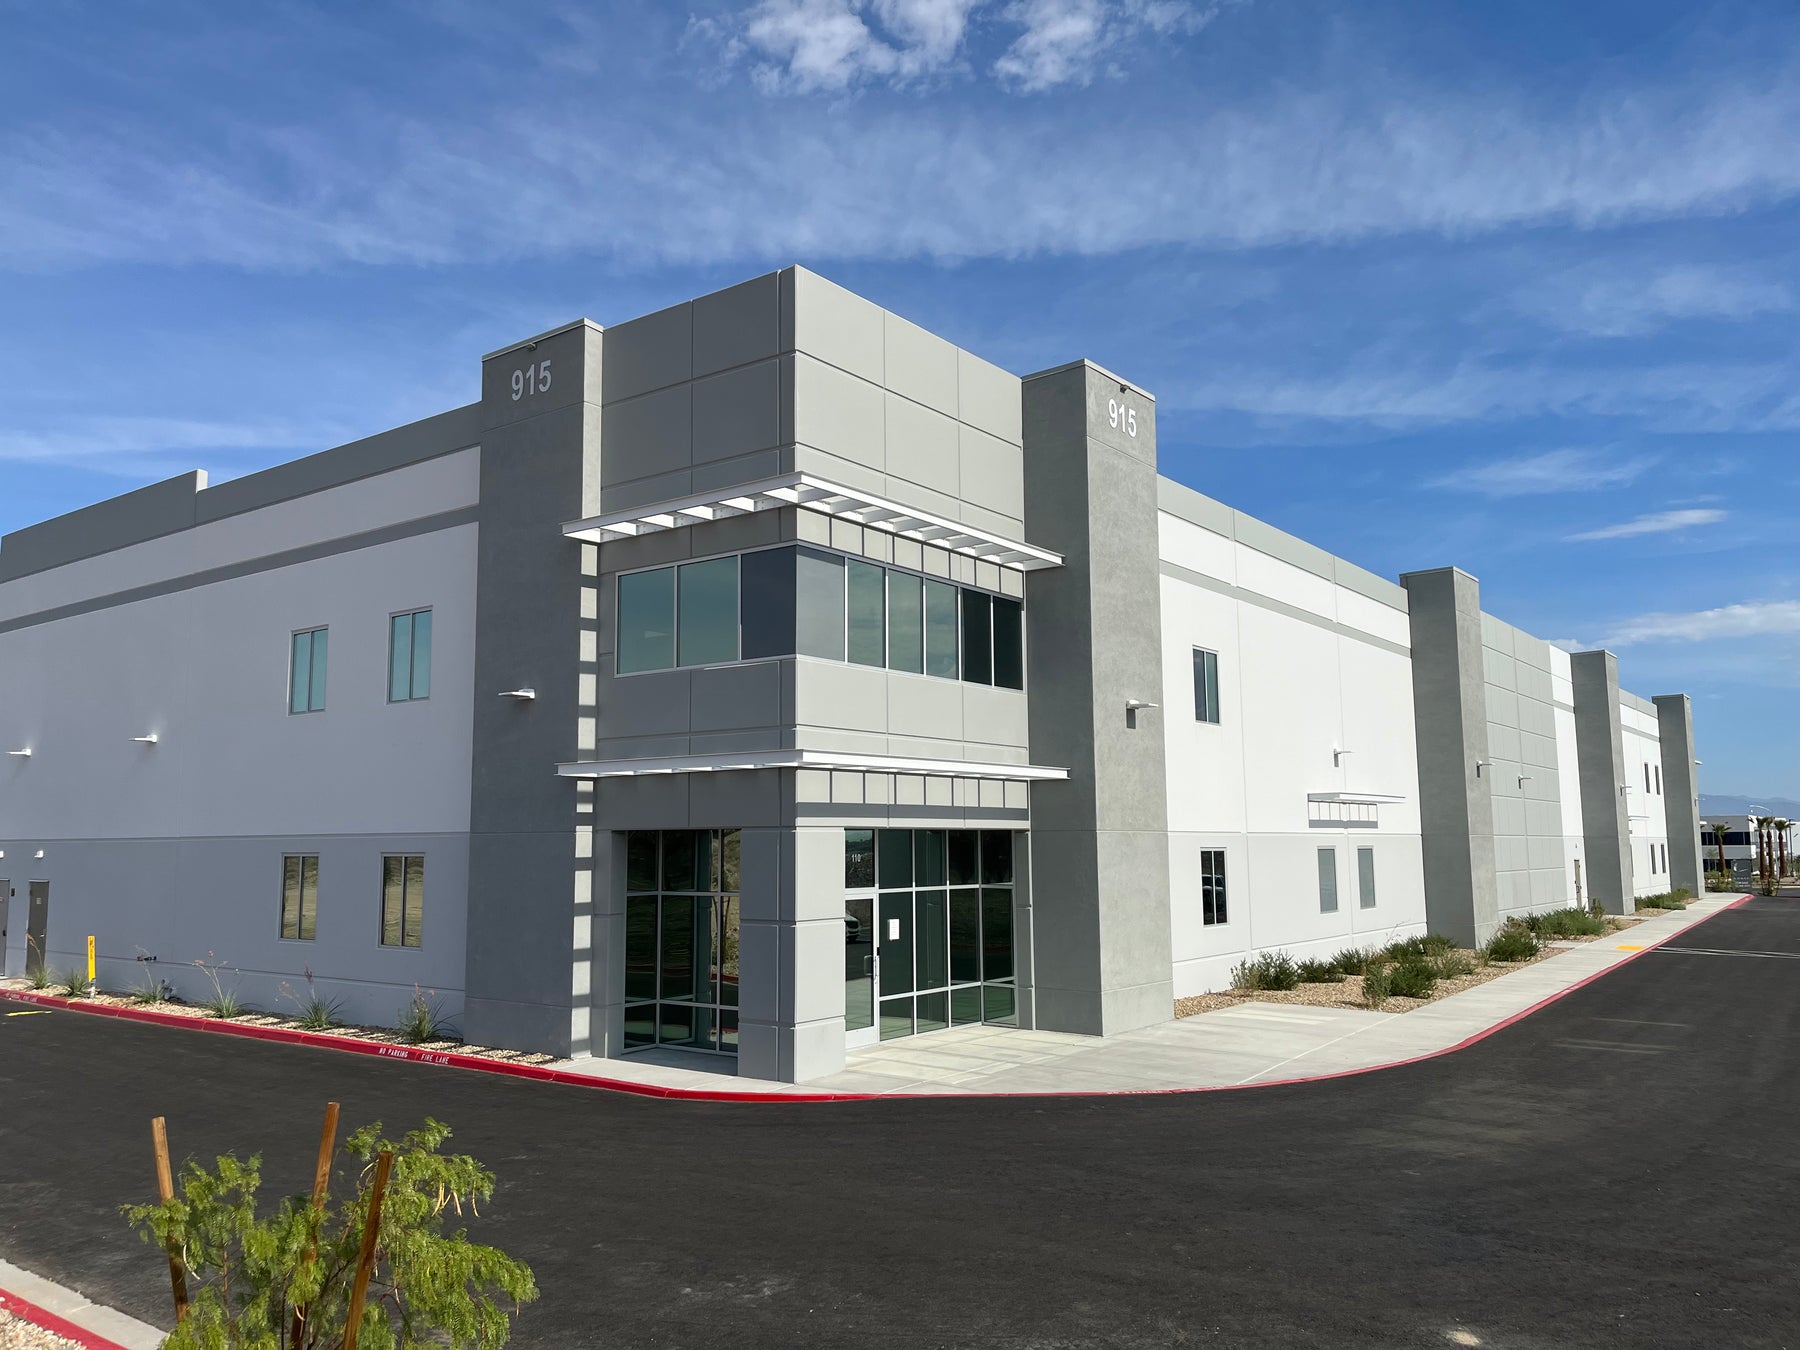 NEW ATI Electrical Supply Location in Nevada